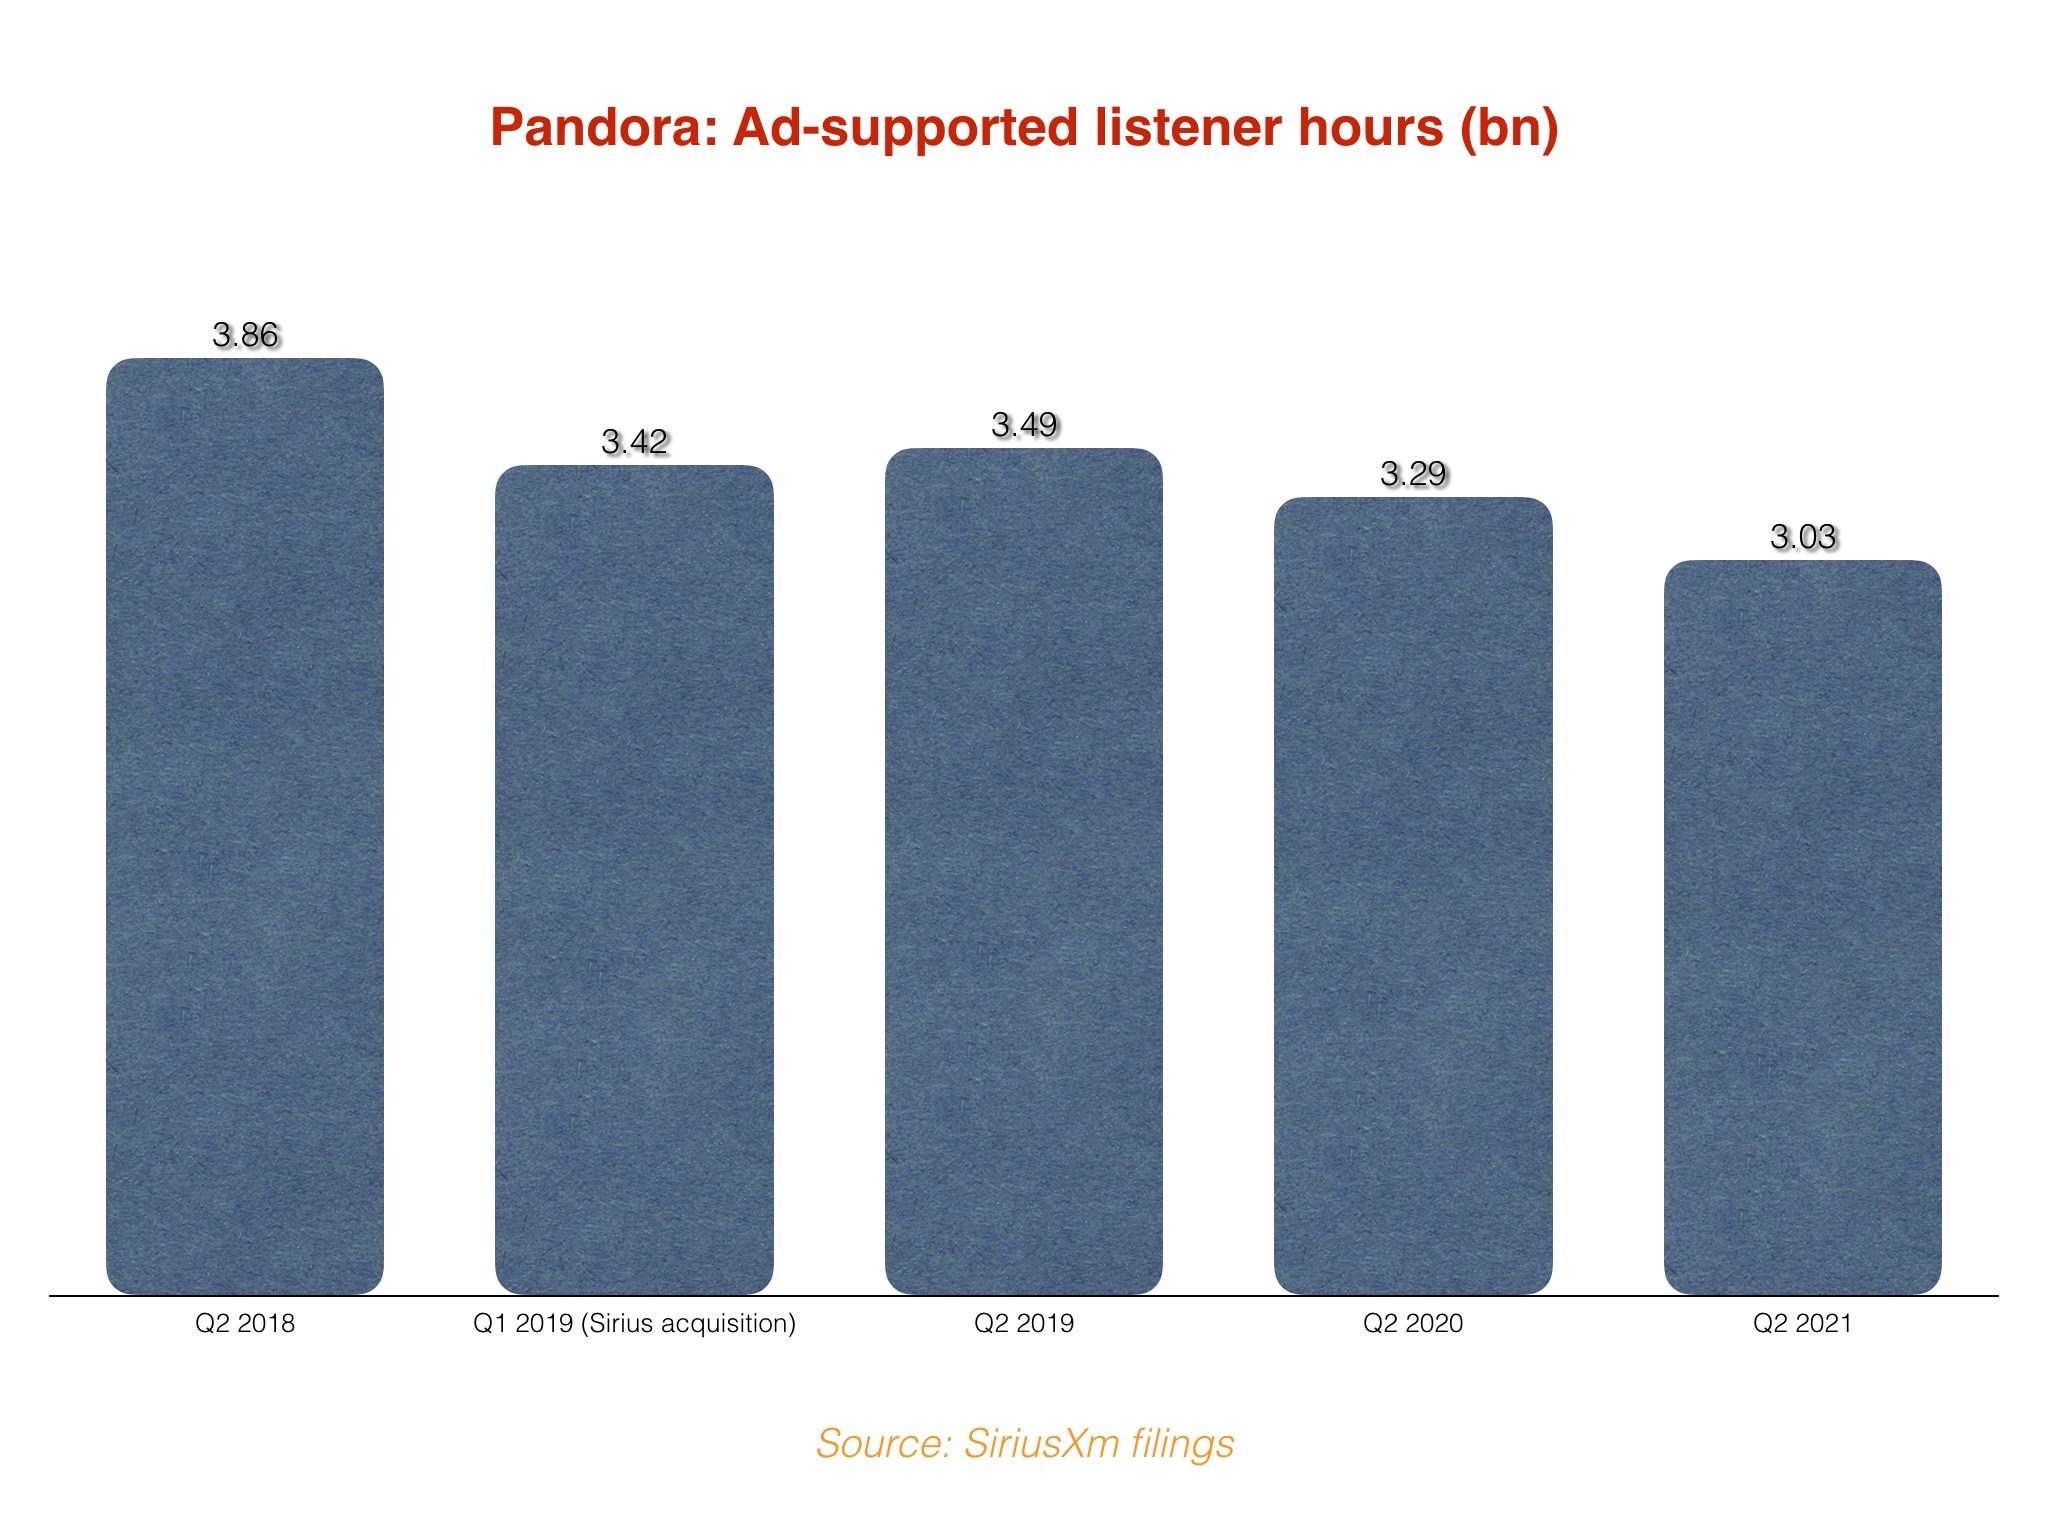 Pandora was acquired for $3.5bn. It's since lost over 10m